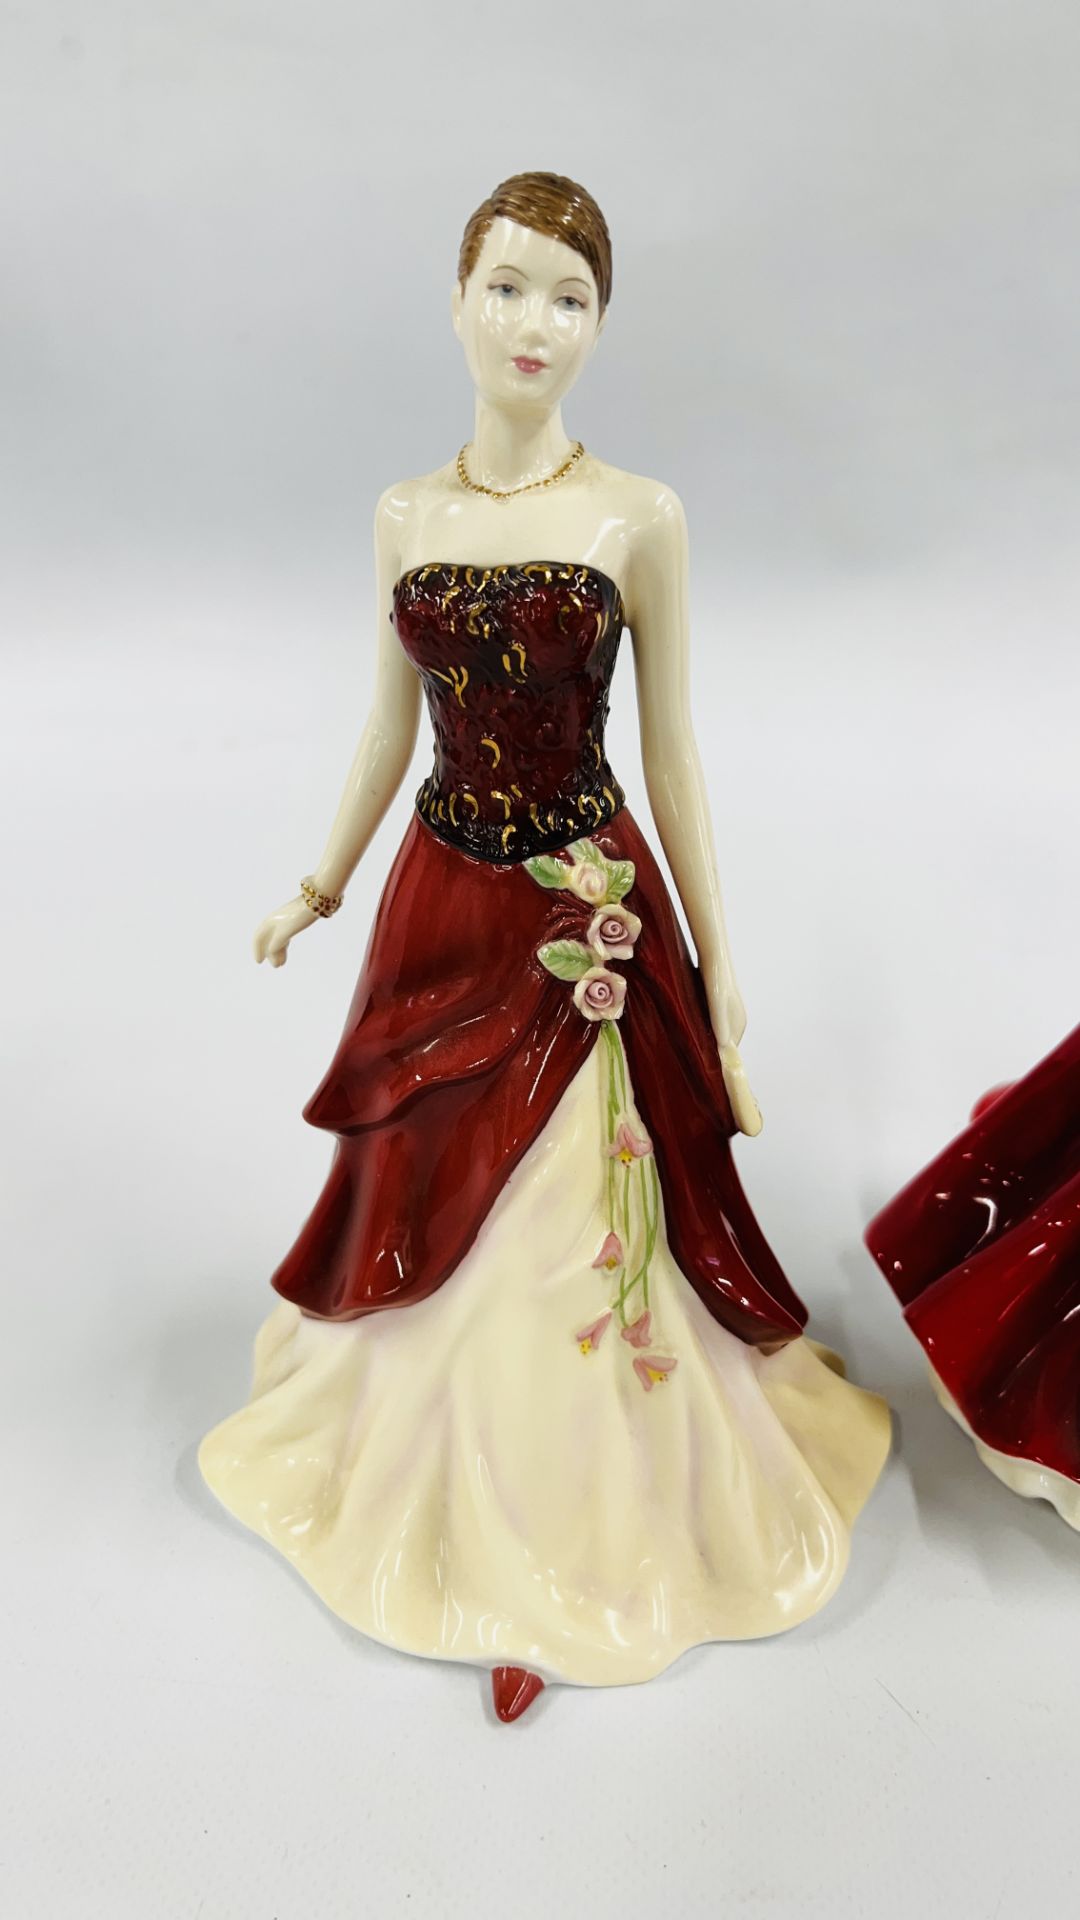 3 ROYAL DOULTON CABINET COLLECTORS FIGURINES TO INCLUDE "NATALIE" HN 5012, LIMITED EDITION 1419/15, - Image 4 of 10